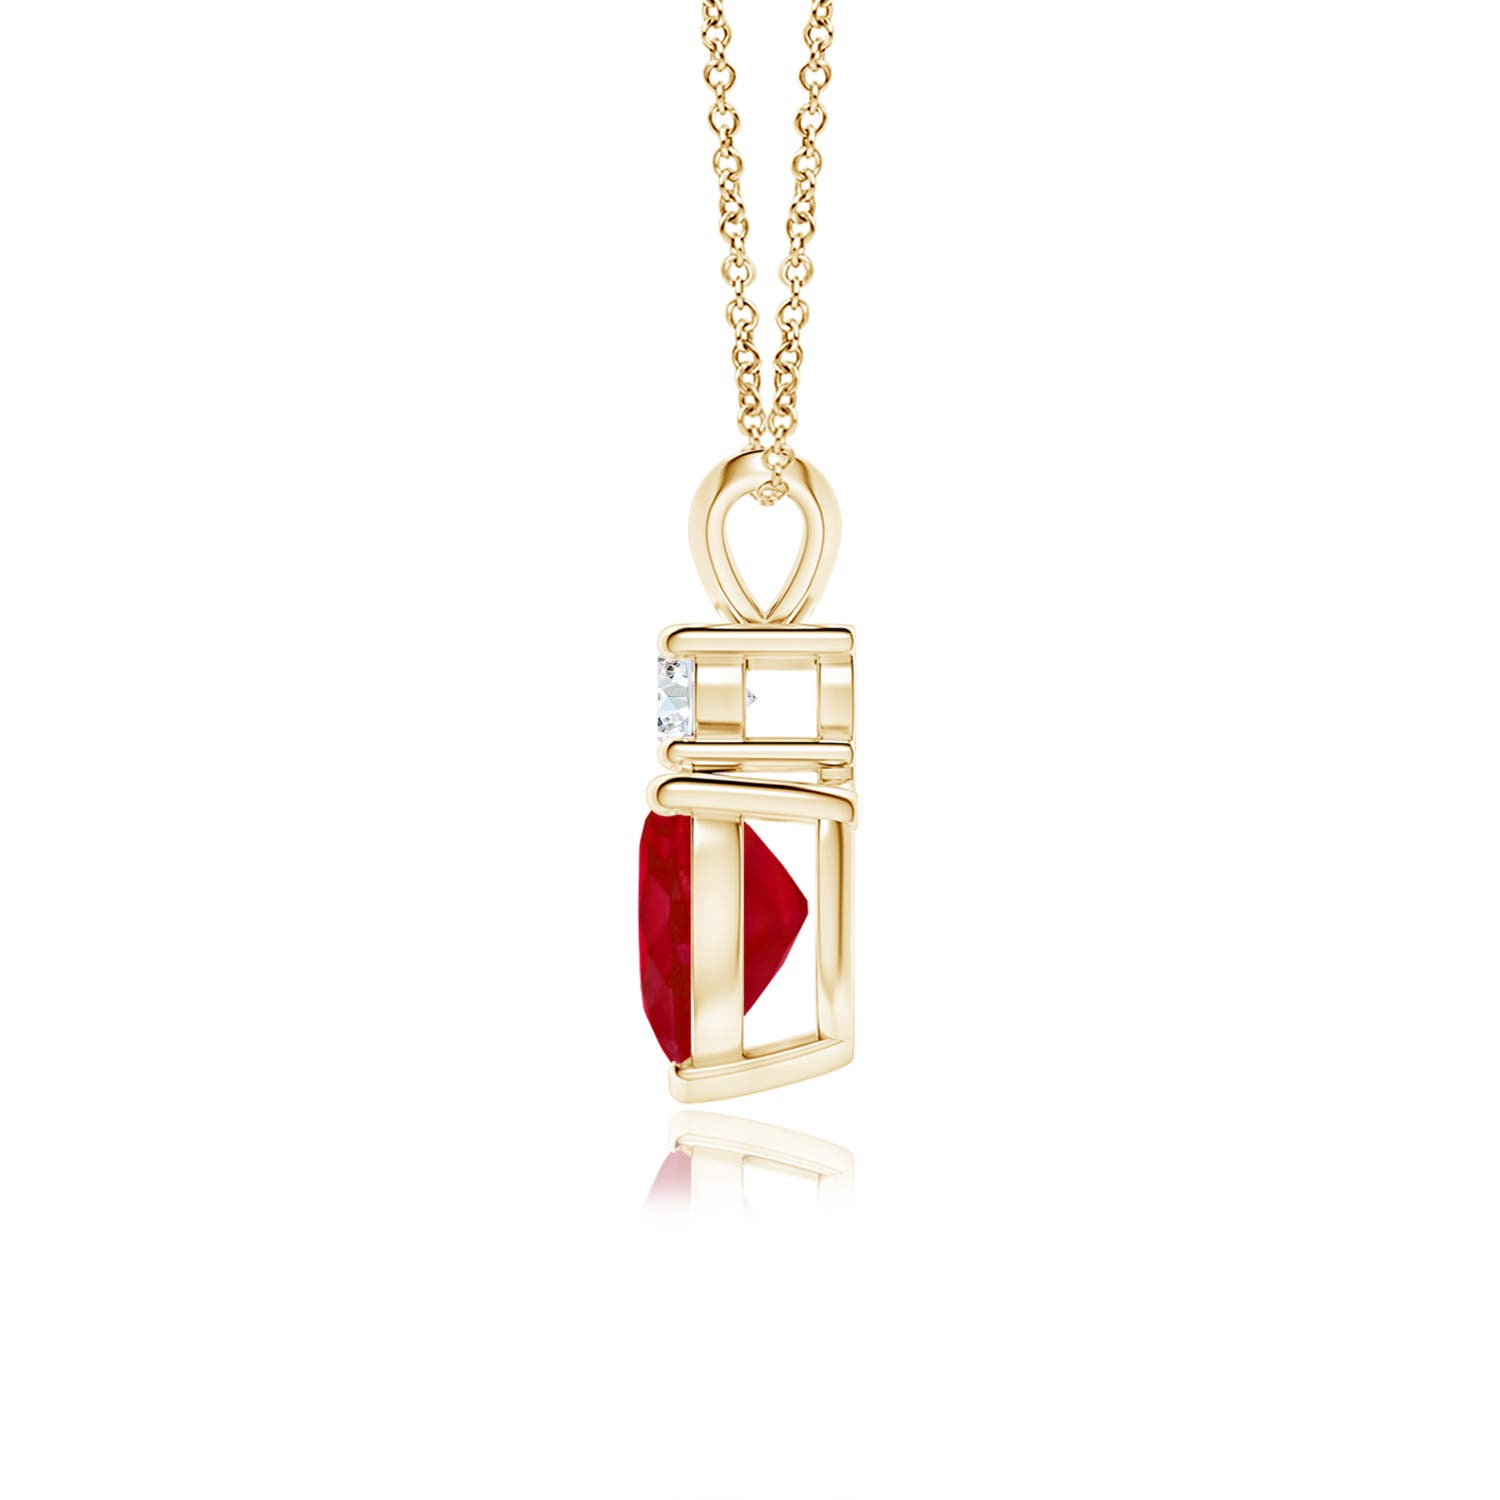 AA - Ruby / 1.8 CT / 14 KT Yellow Gold